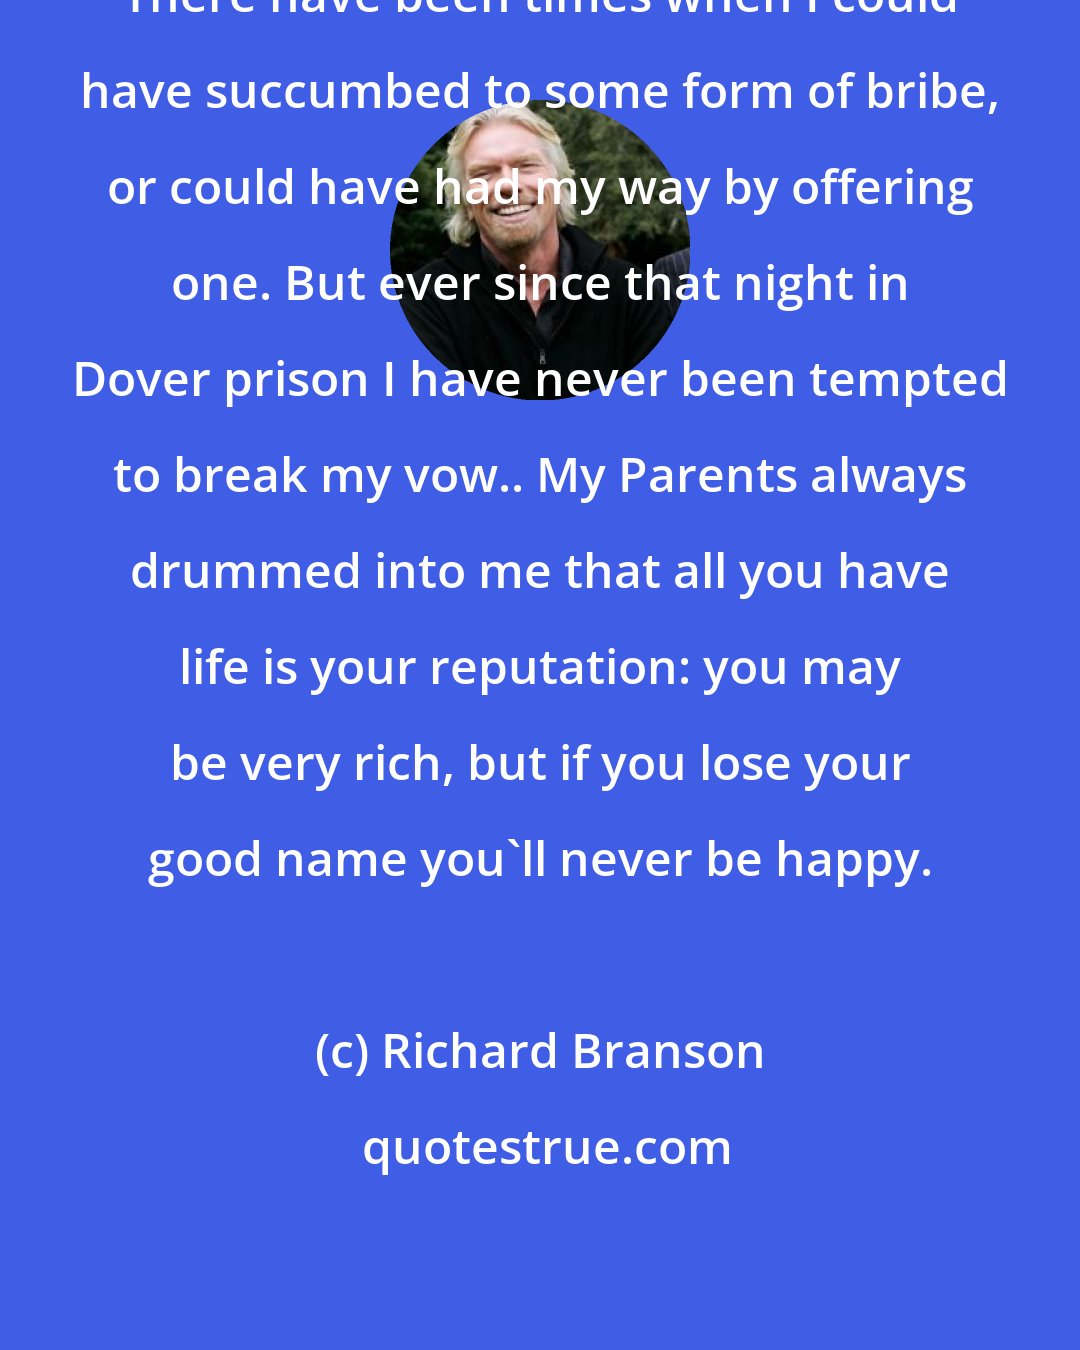 Richard Branson: There have been times when I could have succumbed to some form of bribe, or could have had my way by offering one. But ever since that night in Dover prison I have never been tempted to break my vow.. My Parents always drummed into me that all you have life is your reputation: you may be very rich, but if you lose your good name you'll never be happy.